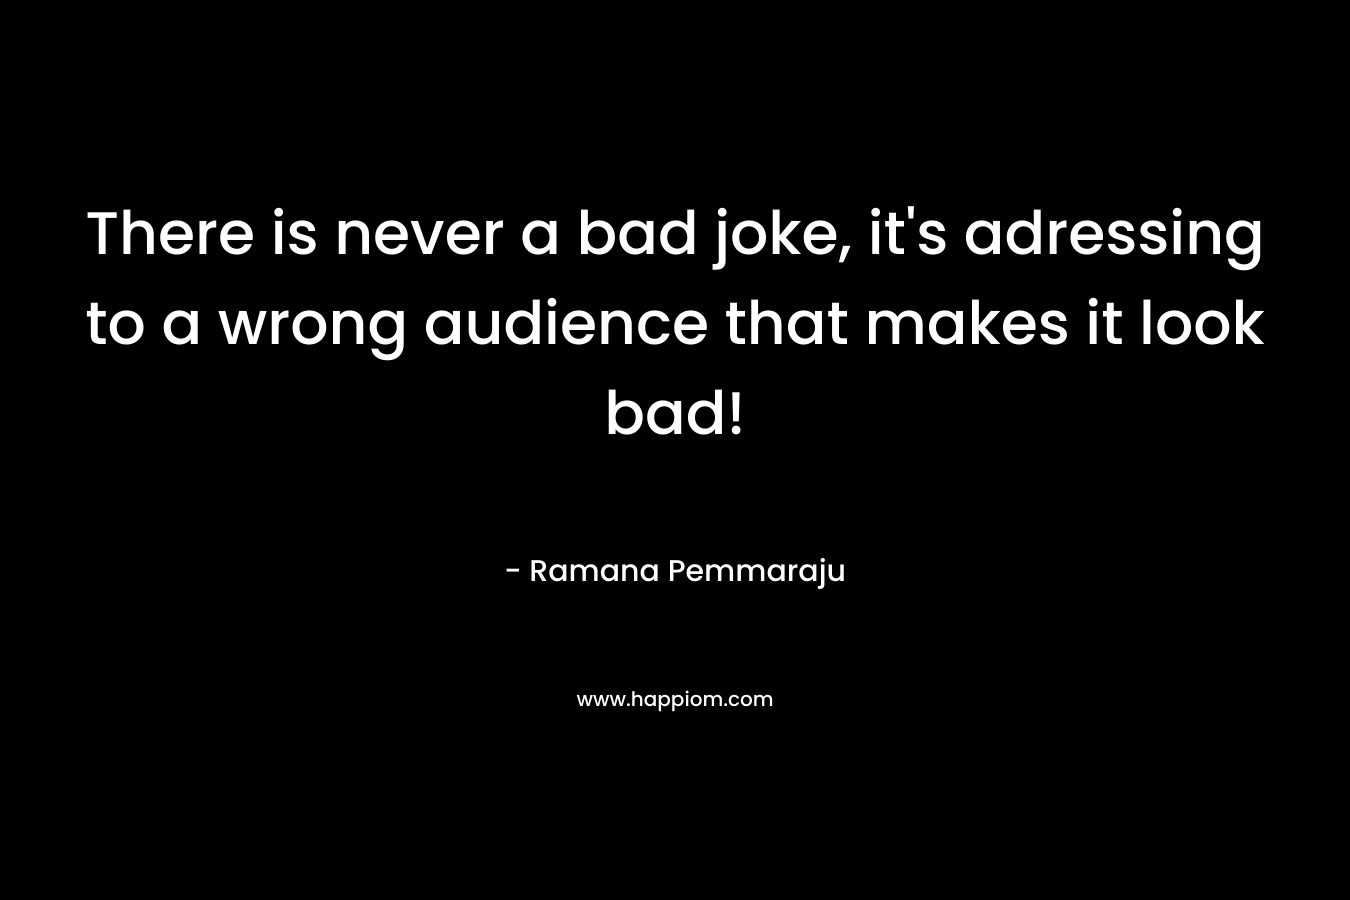 There is never a bad joke, it’s adressing to a wrong audience that makes it look bad! – Ramana Pemmaraju